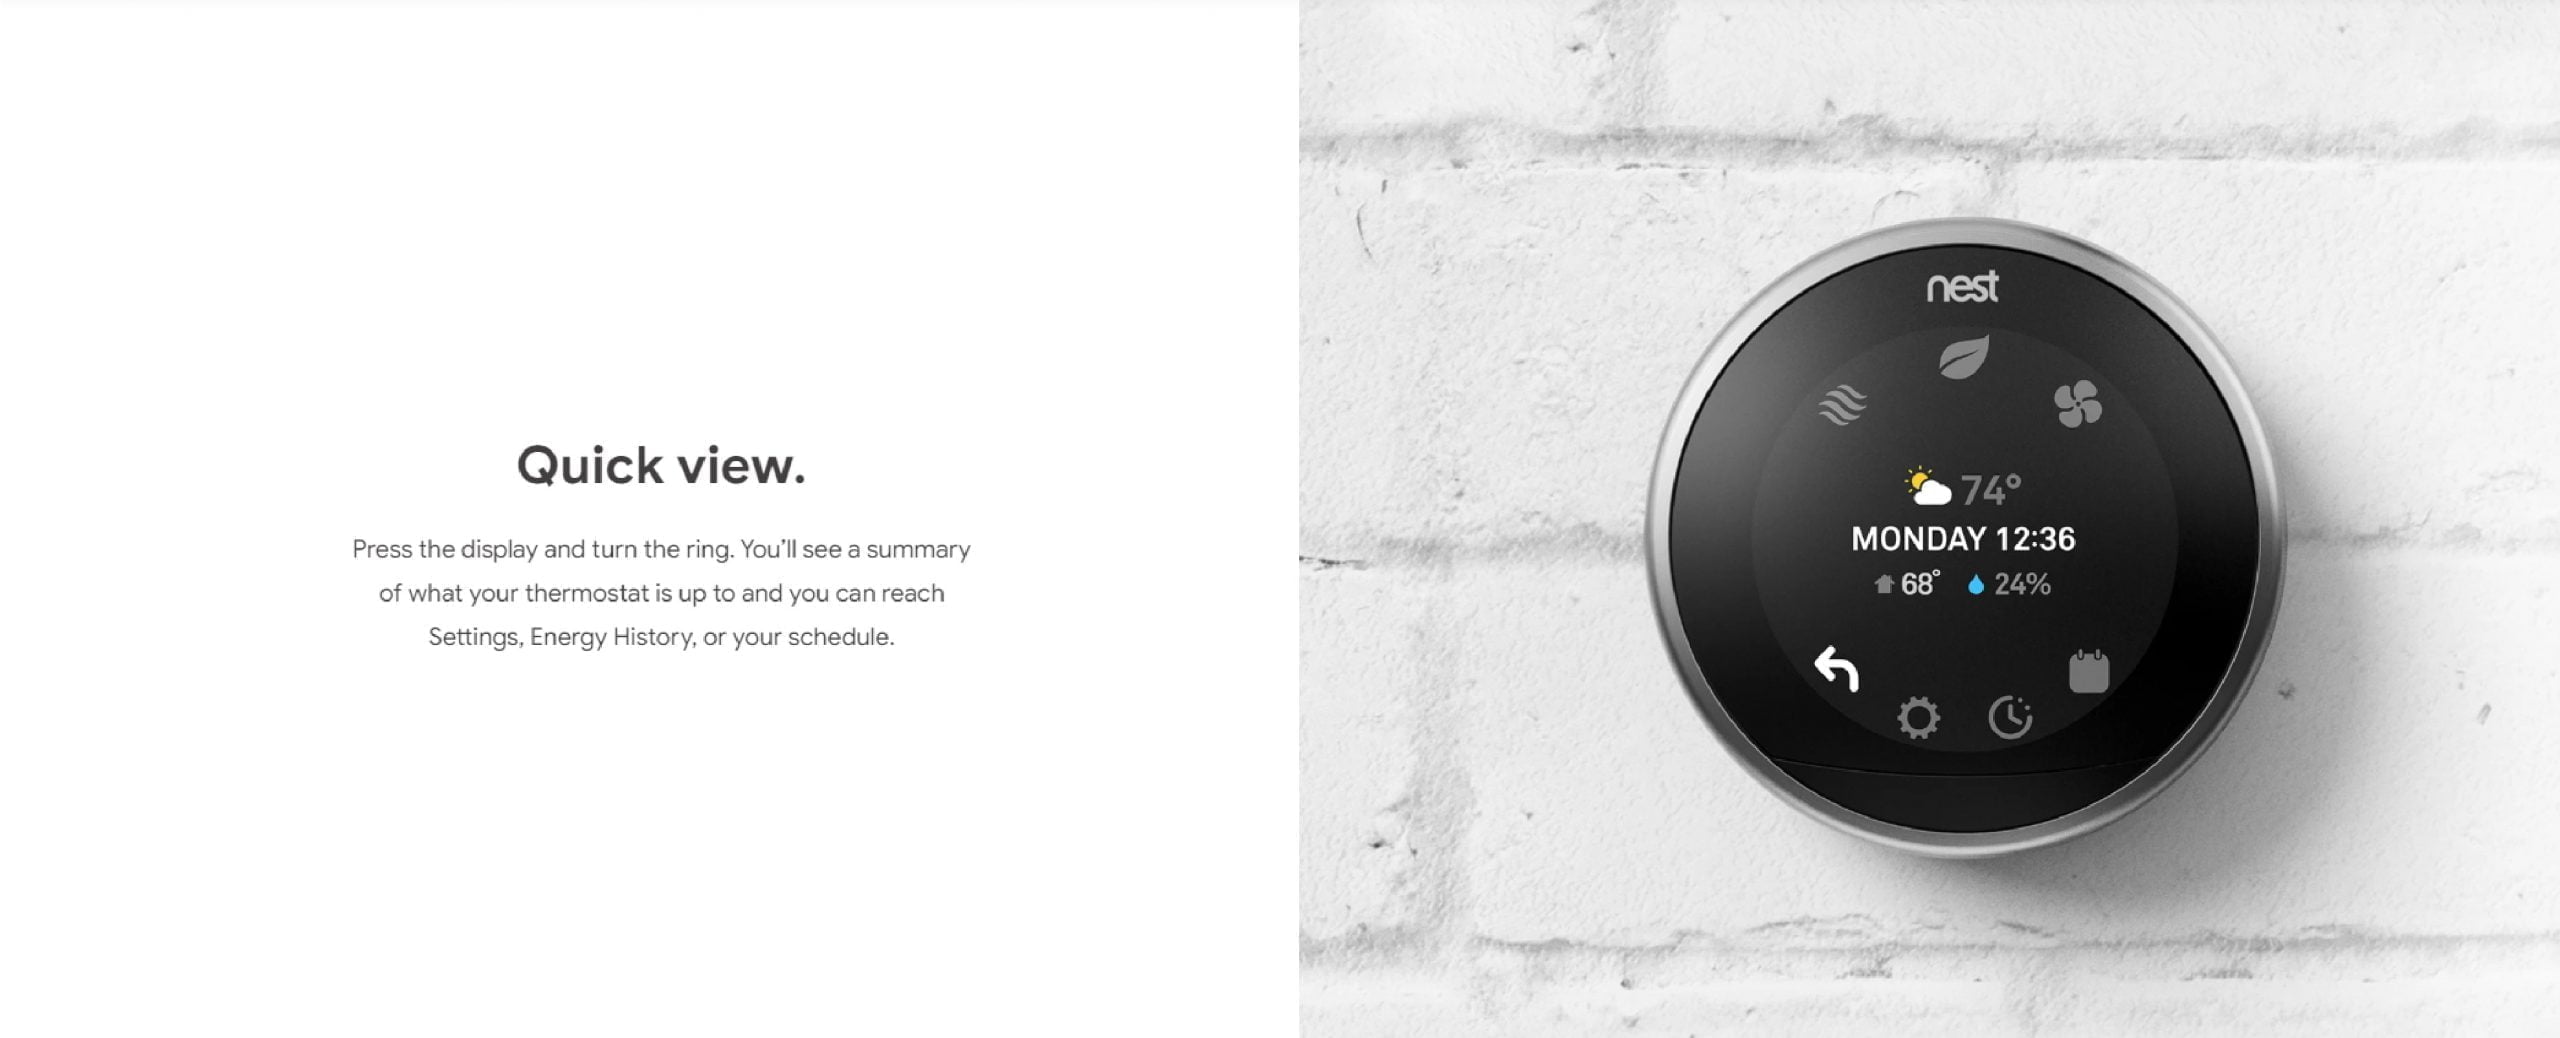 Nest 08 Scaled Google &Lt;H1&Gt;Google Nest Learning Smart Wifi Thermostat 3Rd Gen - Matt Black T3016Us&Lt;/H1&Gt; &Lt;Ul Class=&Quot;A-Unordered-List A-Vertical A-Spacing-Mini&Quot;&Gt; &Lt;Li&Gt;&Lt;Span Class=&Quot;A-List-Item&Quot;&Gt;Auto-Schedule: No More Confusing Programming. It Learns The Temperatures You Like And Programs Itself.&Lt;/Span&Gt;&Lt;/Li&Gt; &Lt;Li&Gt;&Lt;Span Class=&Quot;A-List-Item&Quot;&Gt;Wi-Fi Thermostat: Connect The Nest Thermostat To Wi-Fi To Change The Temperature From Your Phone, Tablet Or Laptop.&Lt;/Span&Gt;&Lt;/Li&Gt; &Lt;Li&Gt;&Lt;Span Class=&Quot;A-List-Item&Quot;&Gt;Energy Saving: You’ll See The Nest Leaf When You Choose A Temperature That Saves Energy. It Guides You In The Right Direction.&Lt;/Span&Gt;&Lt;/Li&Gt; &Lt;Li&Gt;&Lt;Span Class=&Quot;A-List-Item&Quot;&Gt;Smart Thermostat: Early-On Nest Learns How Your Home Warms Up And Keeps An Eye On The Weather To Get You The Temperature You Want When You Want It.&Lt;/Span&Gt;&Lt;/Li&Gt; &Lt;Li&Gt;&Lt;Span Class=&Quot;A-List-Item&Quot;&Gt;Home/Away Assist: The Nest Thermostat Automatically Turns Itself Down When You’re Away To Avoid Heating Or Cooling An Empty Home.&Lt;/Span&Gt;&Lt;/Li&Gt; &Lt;Li&Gt;&Lt;Span Class=&Quot;A-List-Item&Quot;&Gt;Works With Amazon Alexa For Voice Control (Alexa Device Sold Separately)&Lt;/Span&Gt;&Lt;/Li&Gt; &Lt;Li&Gt;&Lt;Span Class=&Quot;A-List-Item&Quot;&Gt;Auto-Schedule: Nest Learns The Temperatures You Like And Programs Itself In About A Week.&Lt;/Span&Gt;&Lt;/Li&Gt; &Lt;/Ul&Gt; &Lt;H5&Gt;Note : Direct Replacement Warranty One Year&Lt;/H5&Gt; &Lt;Div Class=&Quot;Html-Fragment&Quot;&Gt; &Lt;Div&Gt; &Lt;B&Gt;We Also Provide International Wholesale And Retail Shipping To All Gcc Countries: Saudi Arabia, Qatar, Oman, Kuwait, Bahrain.&Lt;/B&Gt; &Lt;/Div&Gt; &Lt;/Div&Gt; &Lt;Div Class=&Quot;A-Row A-Expander-Container A-Expander-Inline-Container&Quot; Aria-Live=&Quot;Polite&Quot;&Gt; &Lt;Div Class=&Quot;A-Expander-Content A-Expander-Extend-Content A-Expander-Content-Expanded&Quot; Aria-Expanded=&Quot;True&Quot;&Gt;&Lt;/Div&Gt; &Lt;/Div&Gt; Thermostat Google Nest Learning Smart Wifi Thermostat 3Rd Gen - Matt Black T3016Us